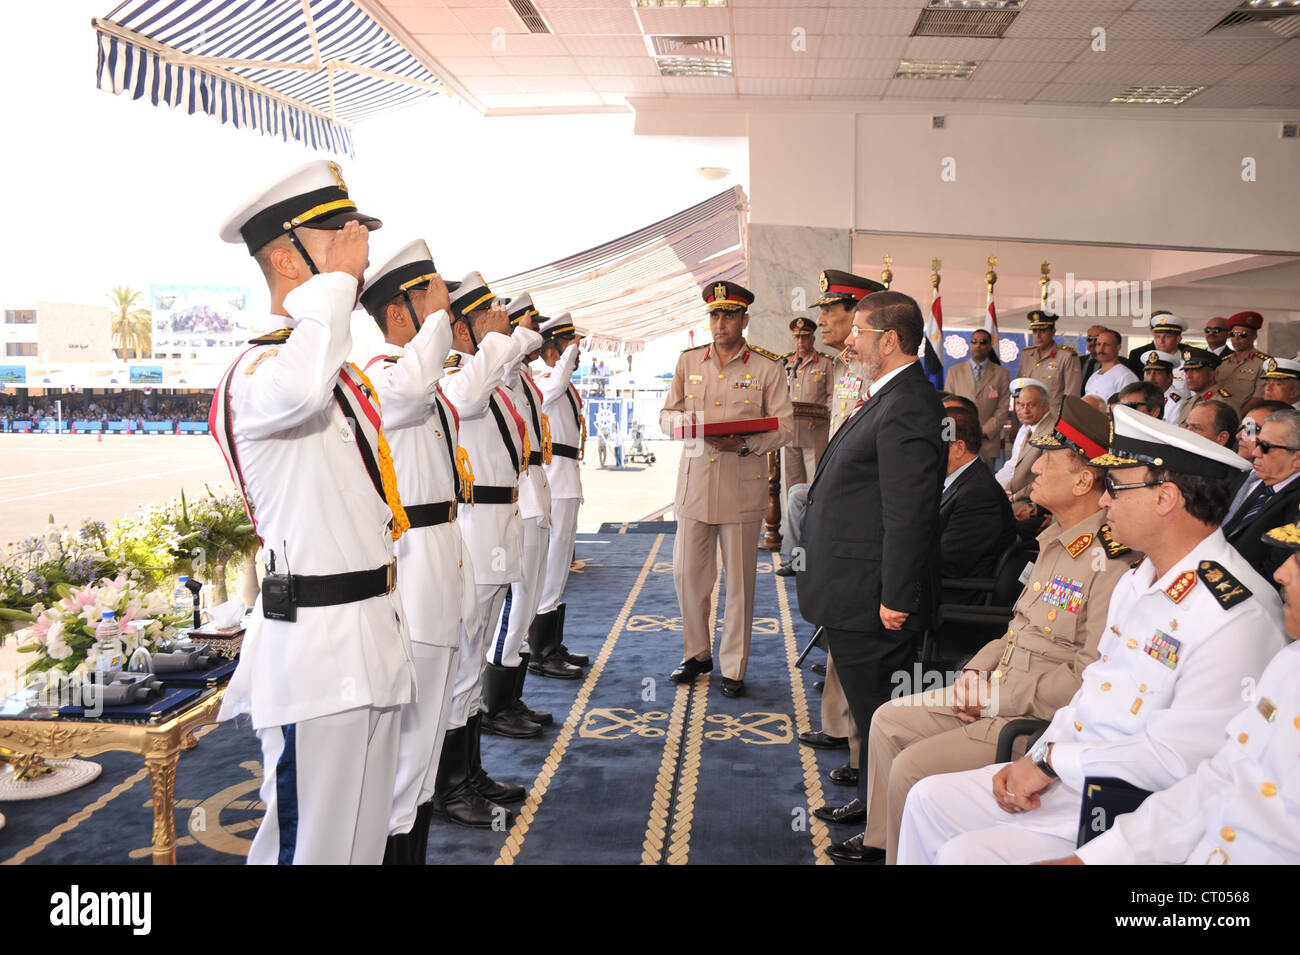 Egypt's President Morsi attends Naval Academy  graduation cermonies with Military head Hussein Tantawi and other senior figures. Stock Photo